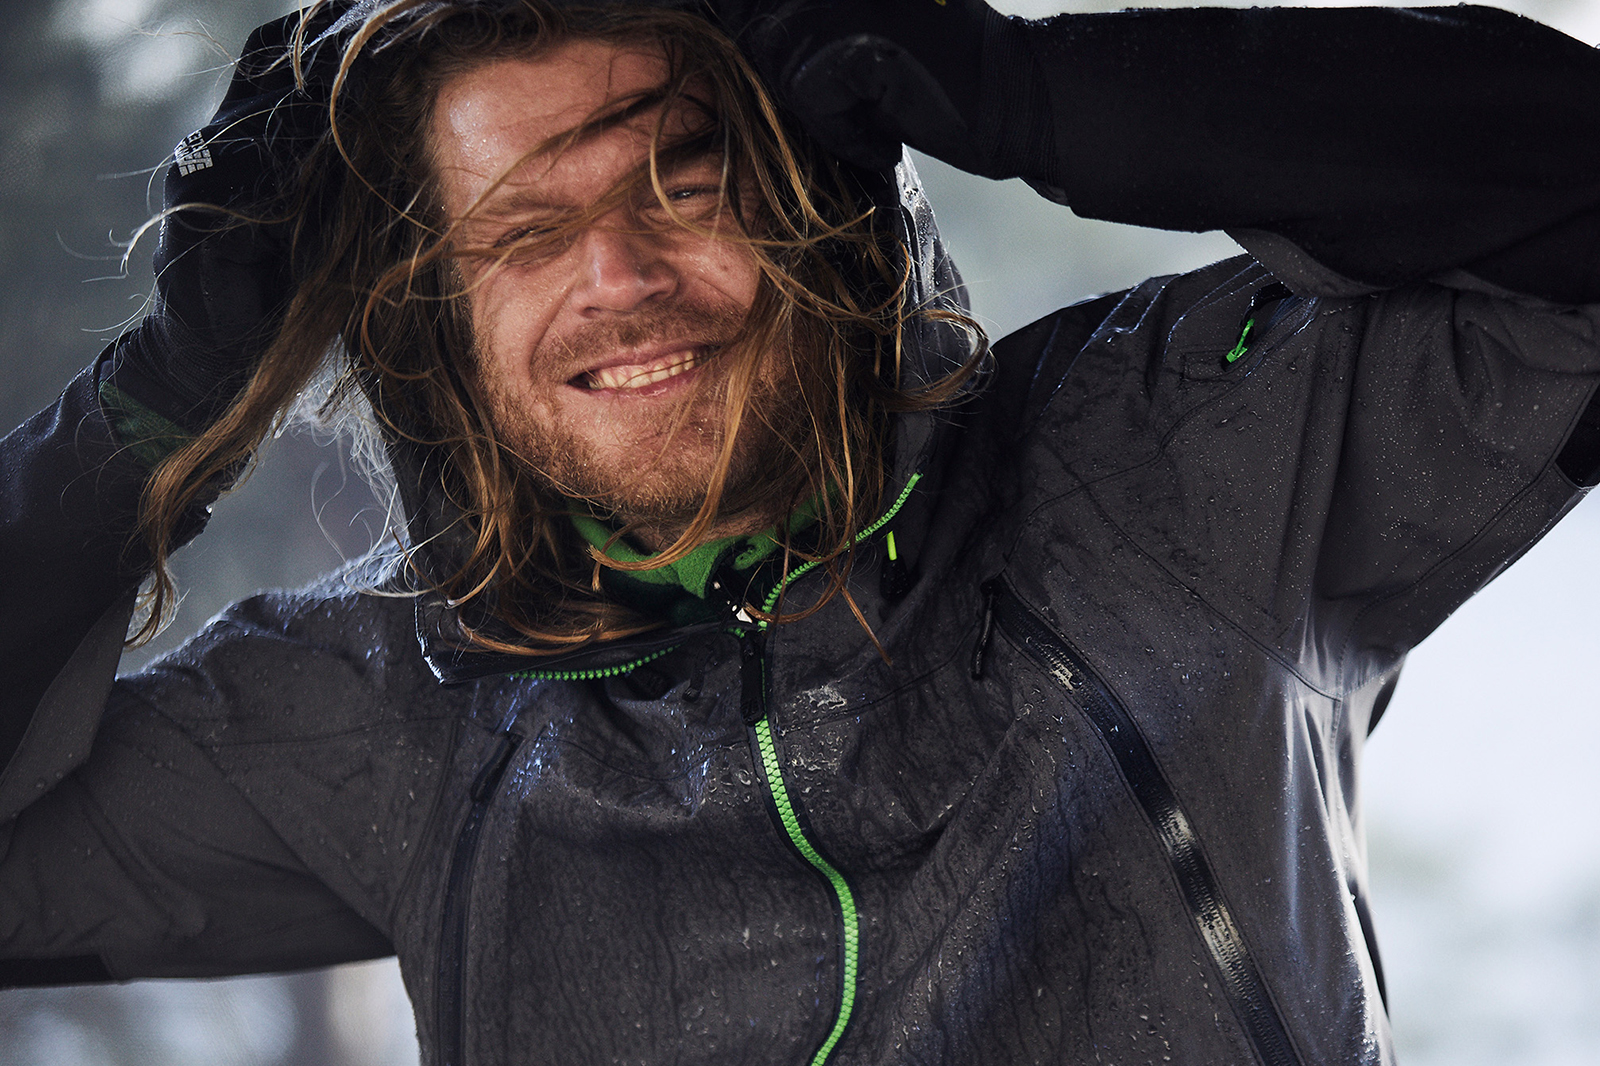 Weatherproof your day with the right workwear